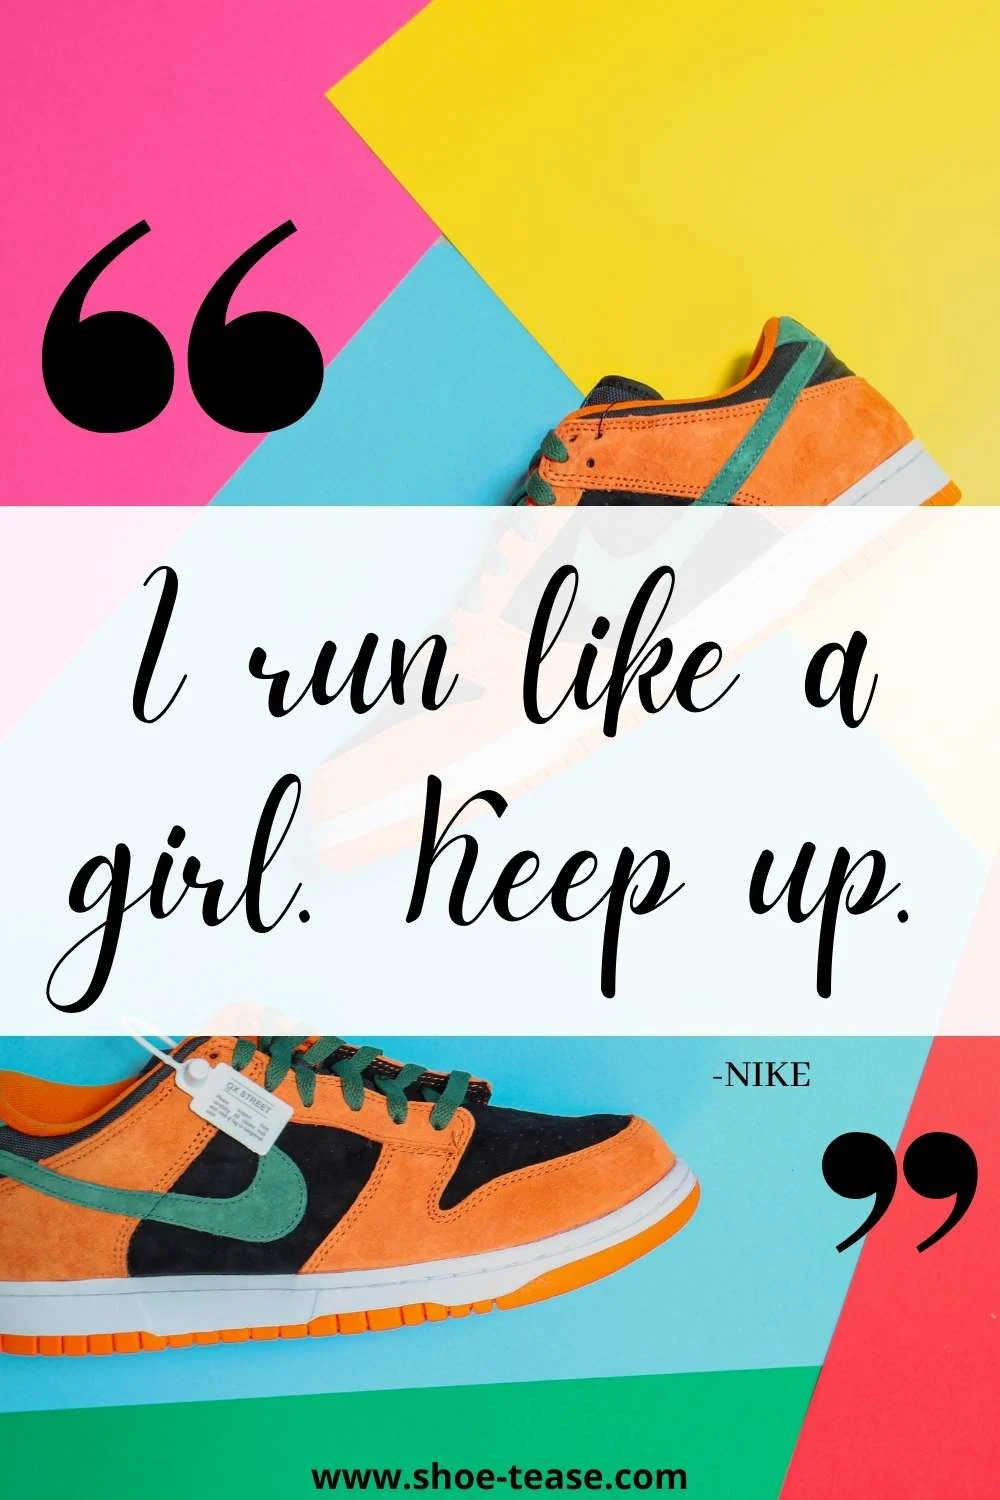 Nike Quote reading I run like a girl. Keep up over a pair of orange, black and green Nike sneakers.